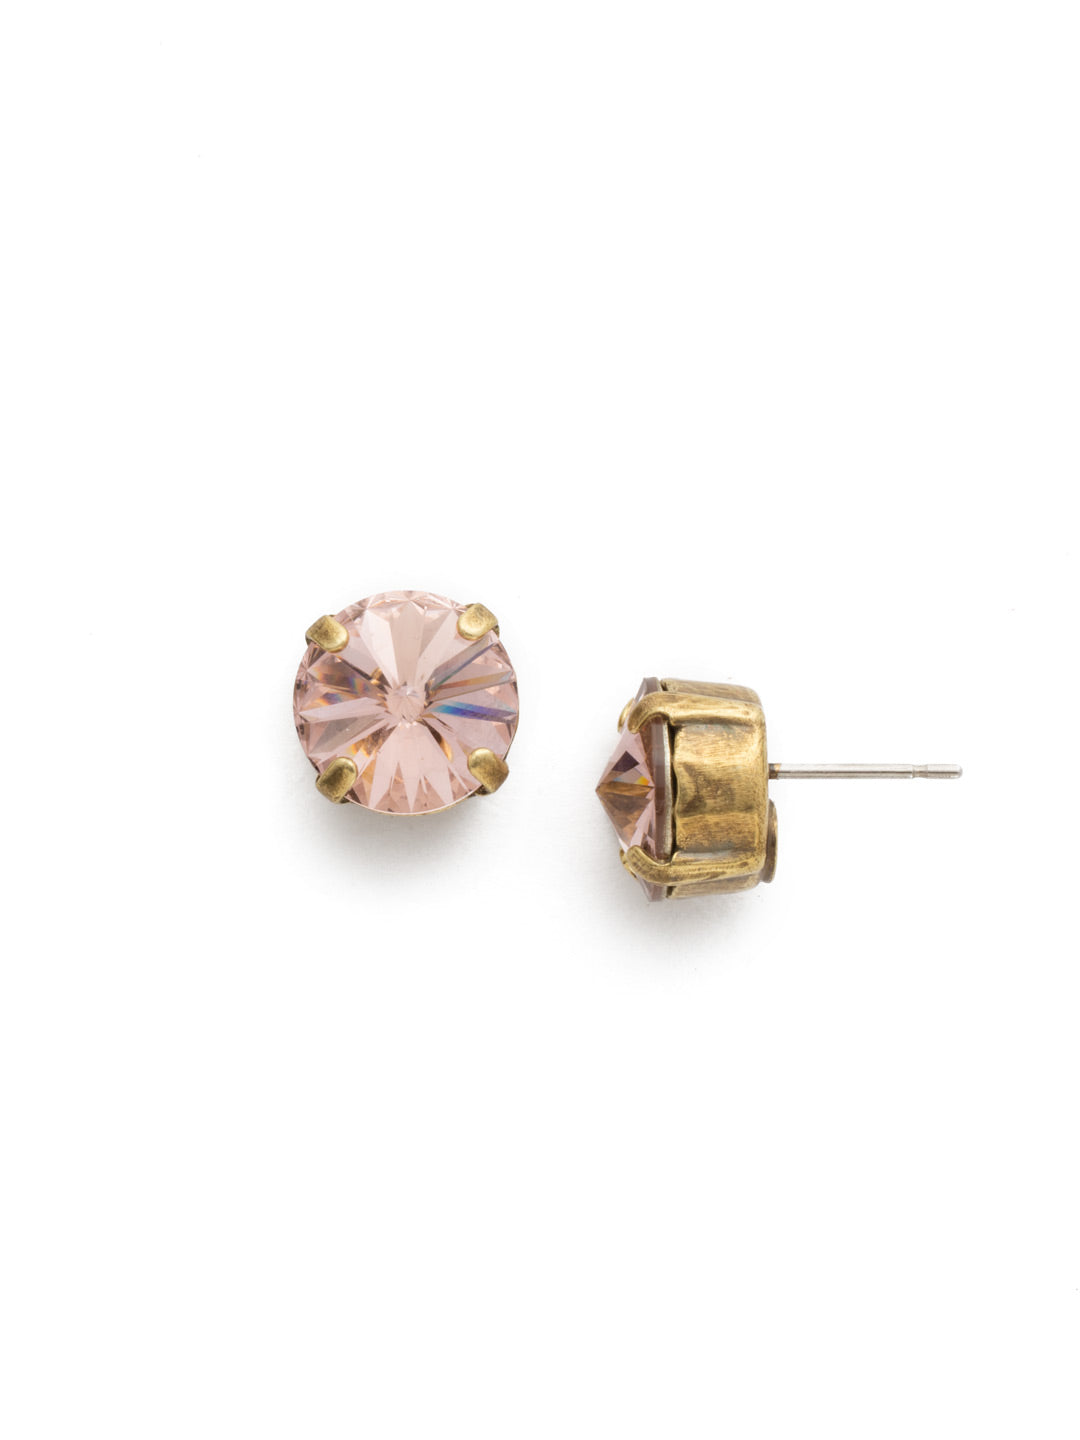 London Stud Earrings - ECM14AGVIN - <p>Everyone needs a great pair of studs. Add some classic sparkle to any occasion with these stud earrings. Need help picking a stud? <a href="https://www.sorrelli.com/blogs/sisterhood/round-stud-earrings-101-a-rundown-of-sizes-styles-and-sparkle">Check out our size guide!</a> From Sorrelli's Vintage Rose collection in our Antique Gold-tone finish.</p>